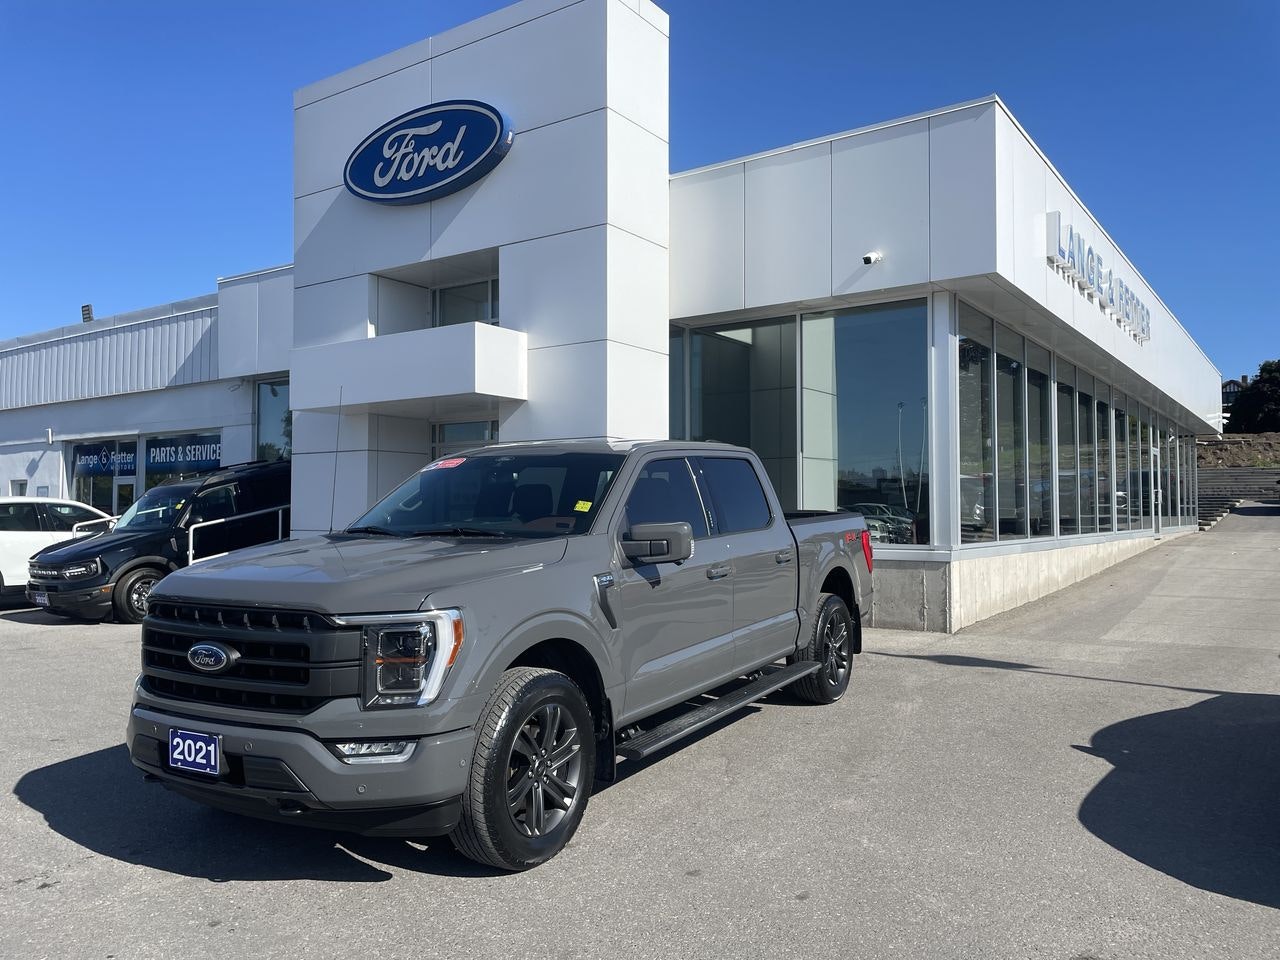 2021 Ford F-150 - P20850A Full Image 1